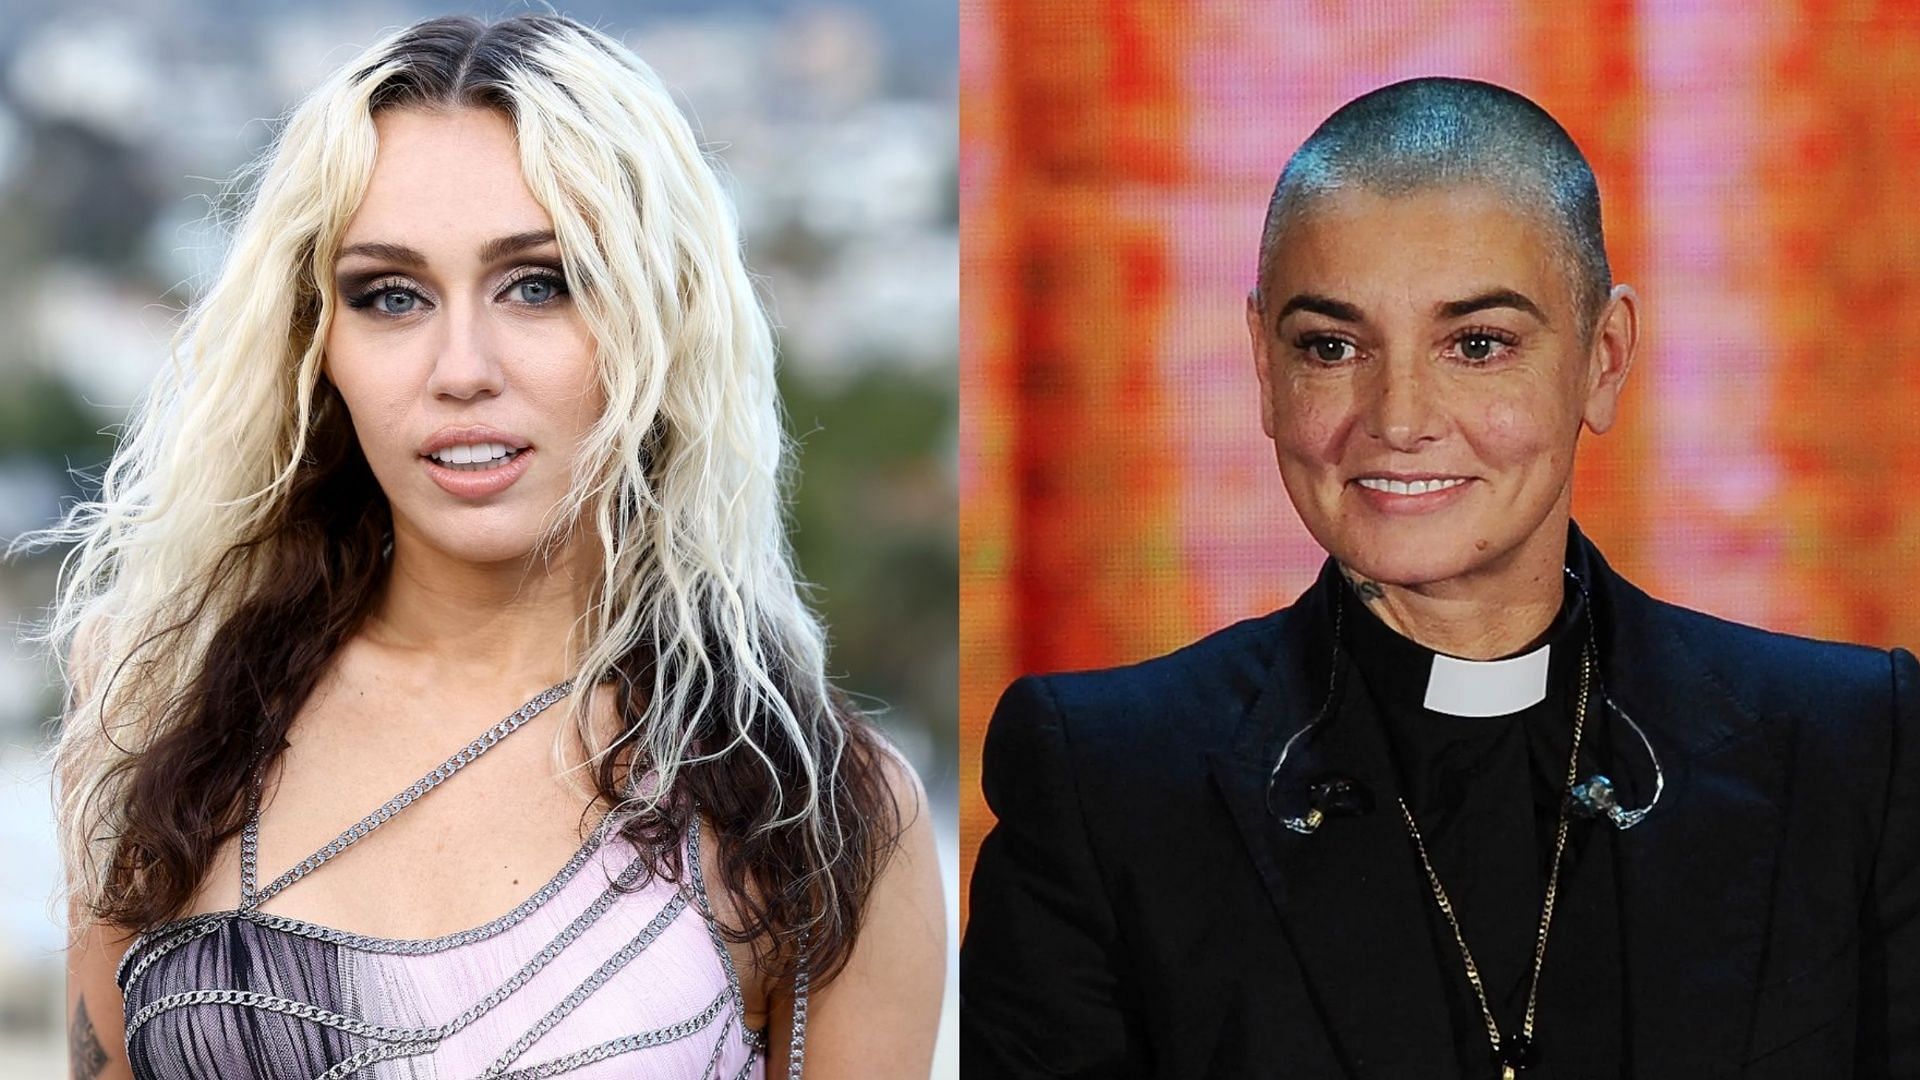 Miley Cyrus and Sinead O